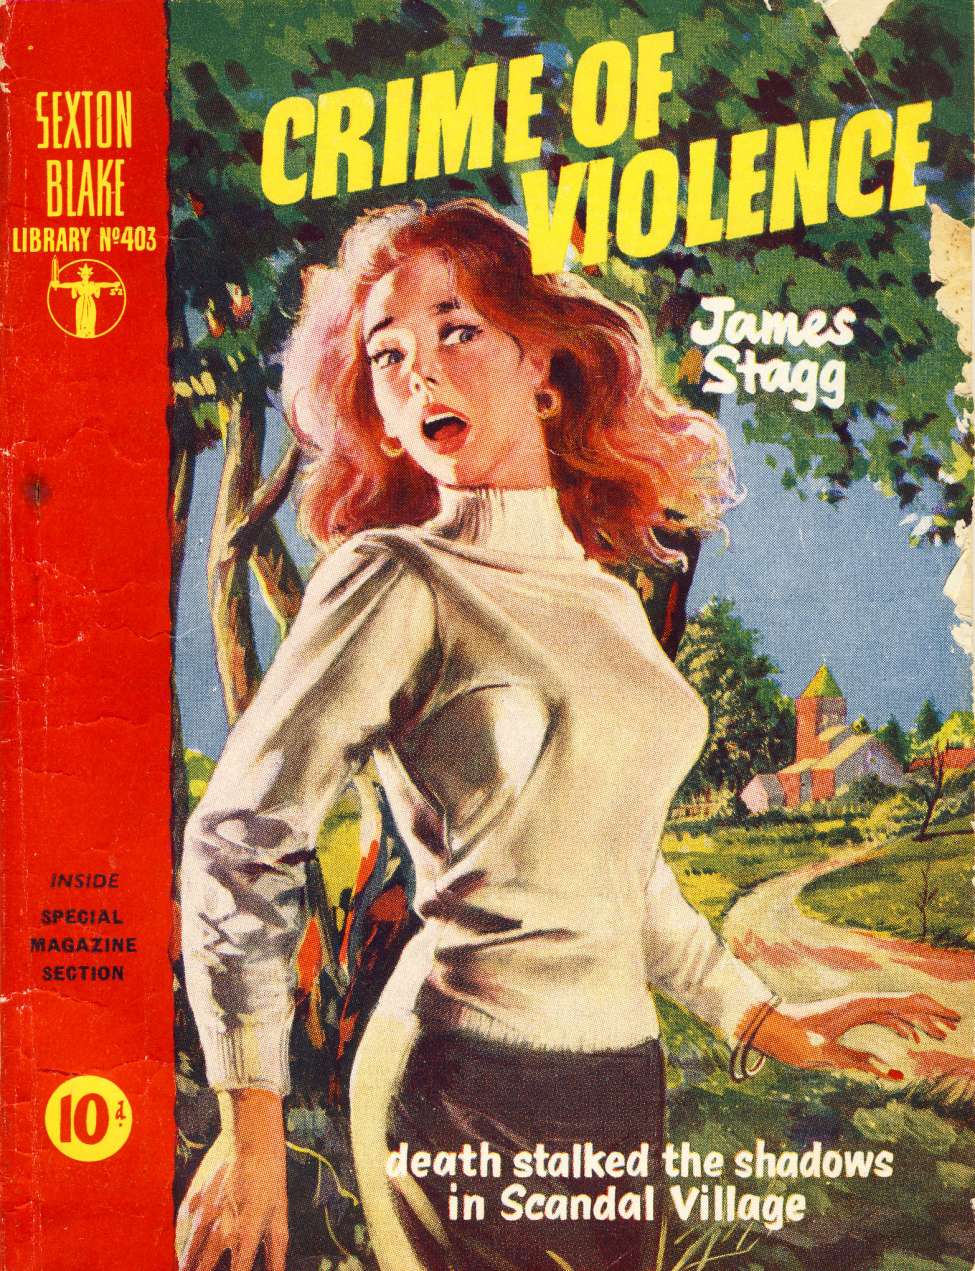 Comic Book Cover For Sexton Blake Library S4 403 - Crime of Violence